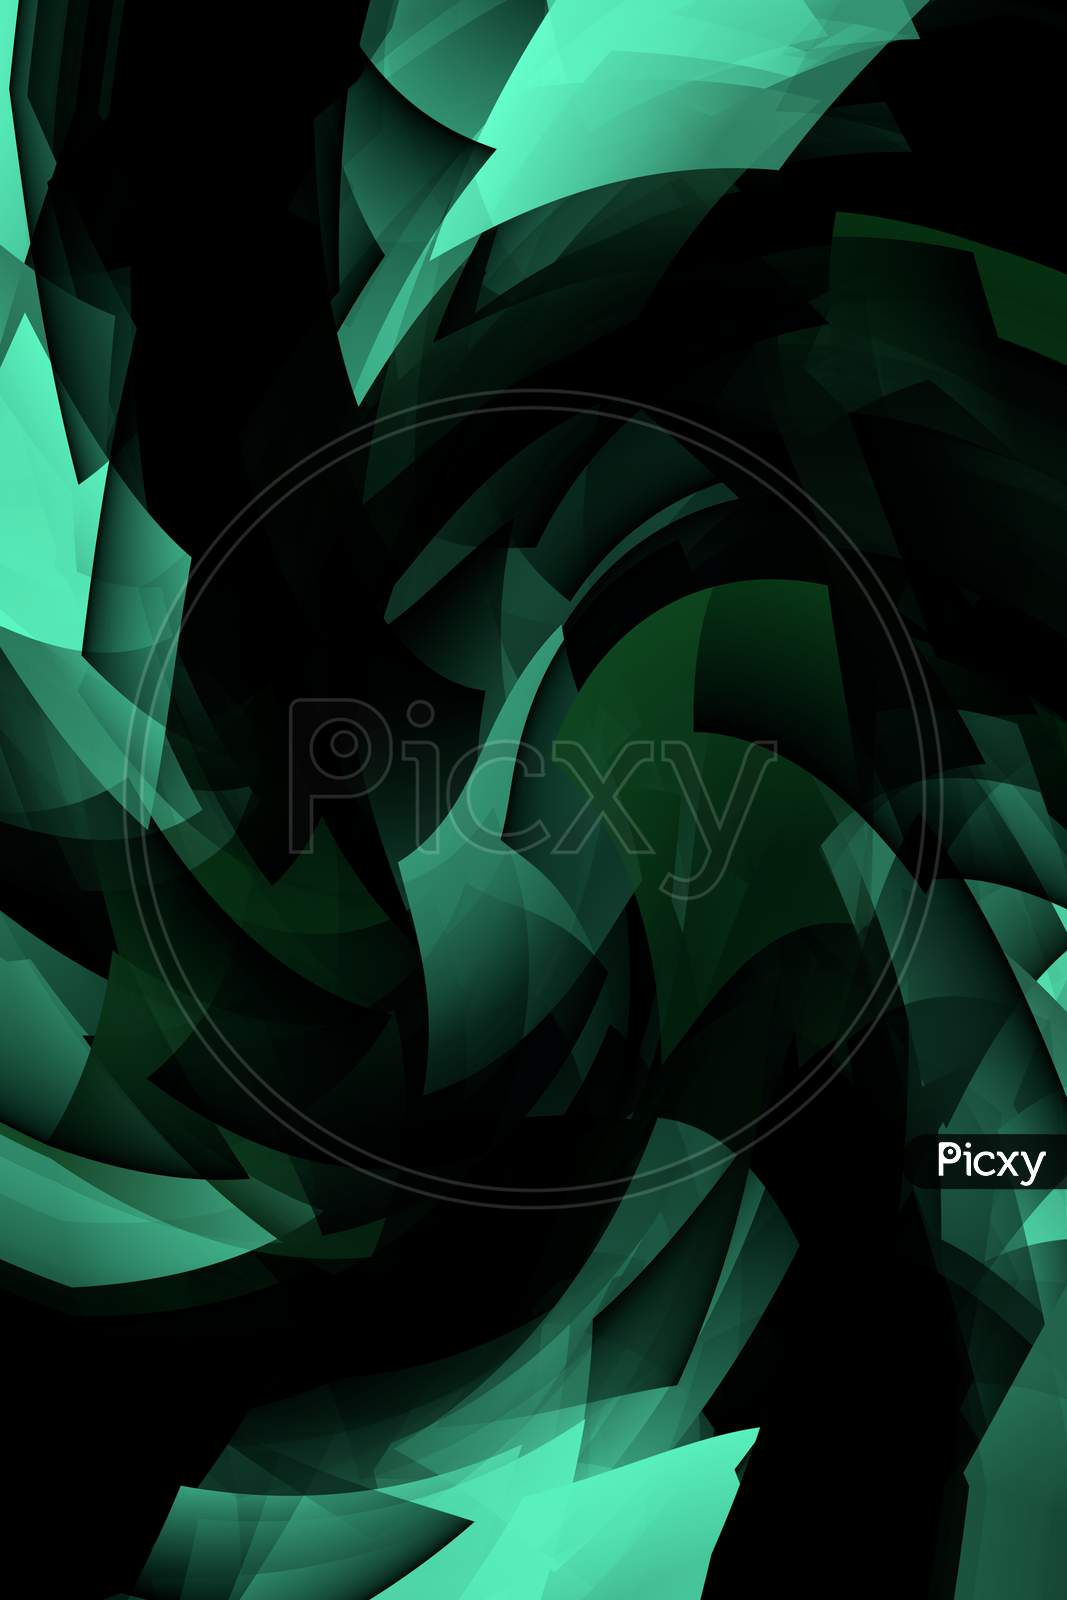 Rounding Frame Green Art Texture Raster Image Digital Creation Graphic Vector Abstract.